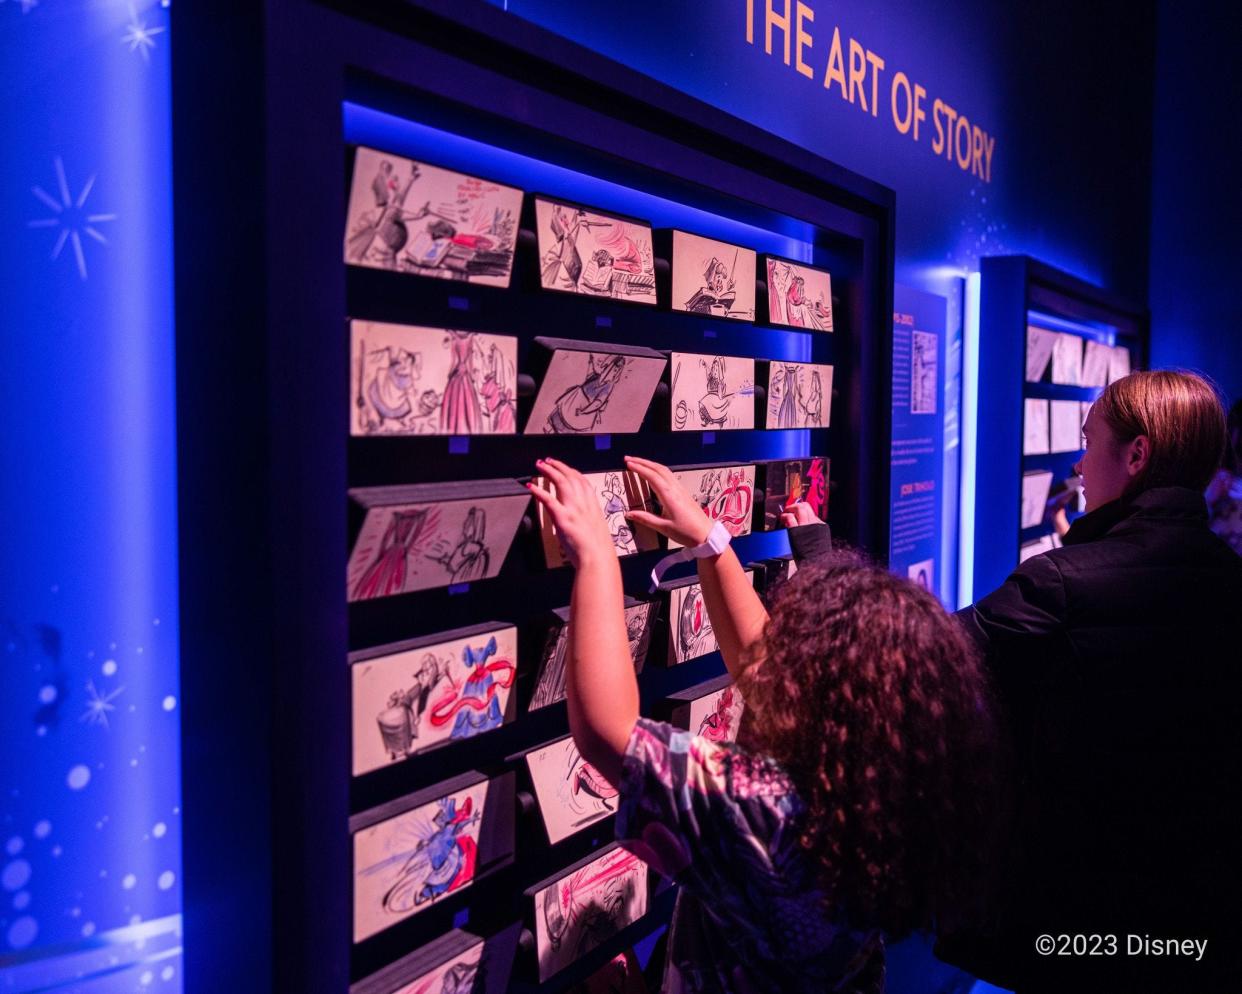 Families can immerse themselves in Disney creations in Nashville with the art of storytelling.